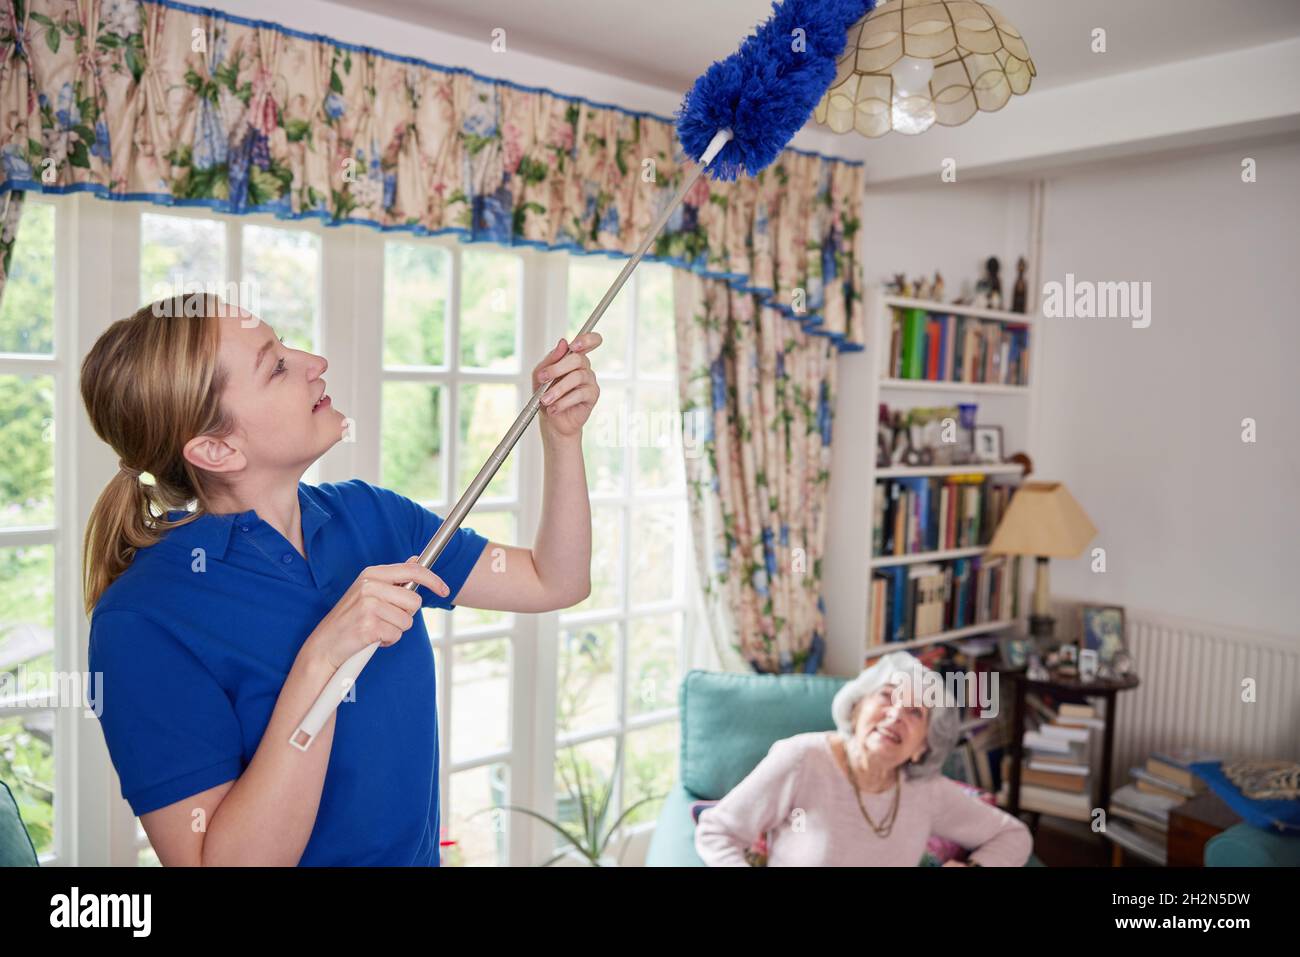 Female Home Help Cleaning House As She Dusts And Talks To Senior Woman Stock Photo